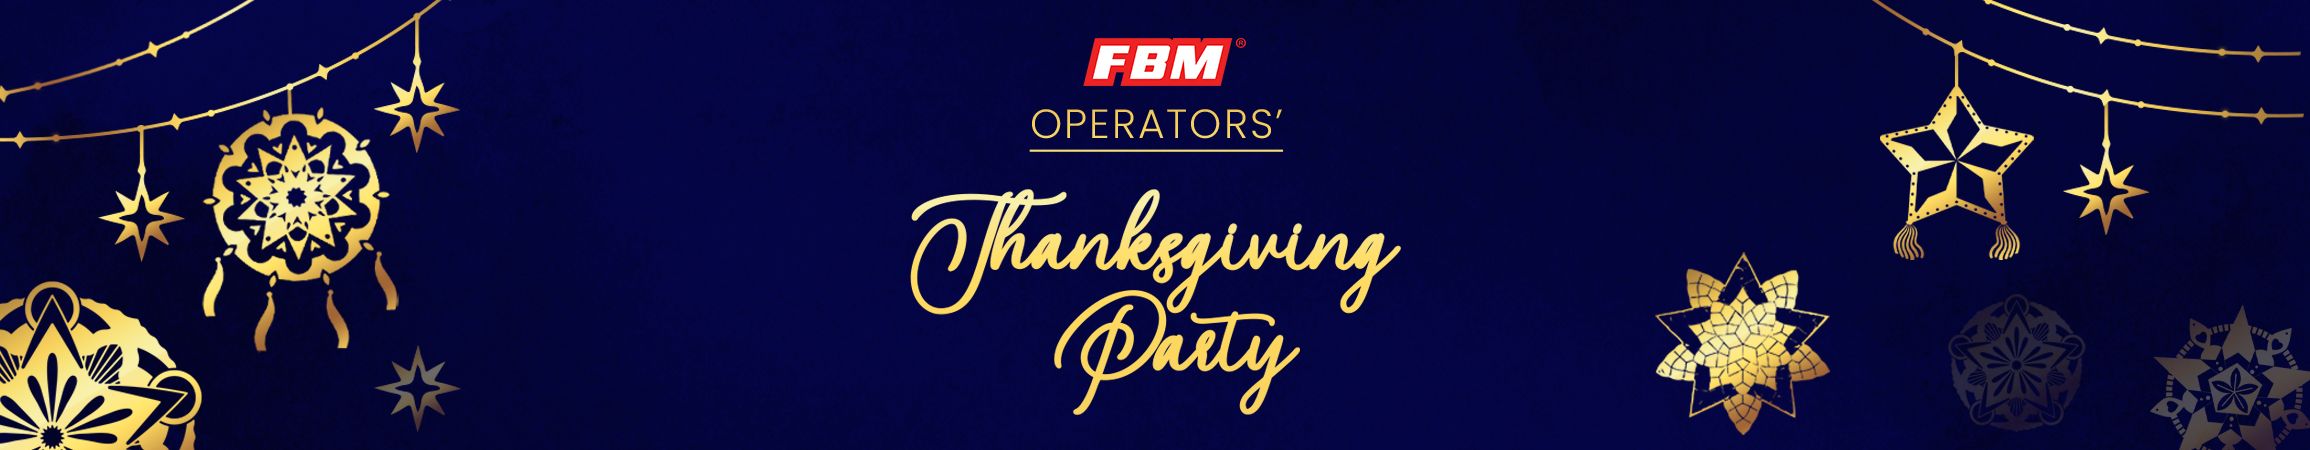 FBM® gathers Philippines operators for a memorable Thanksgiving celebration